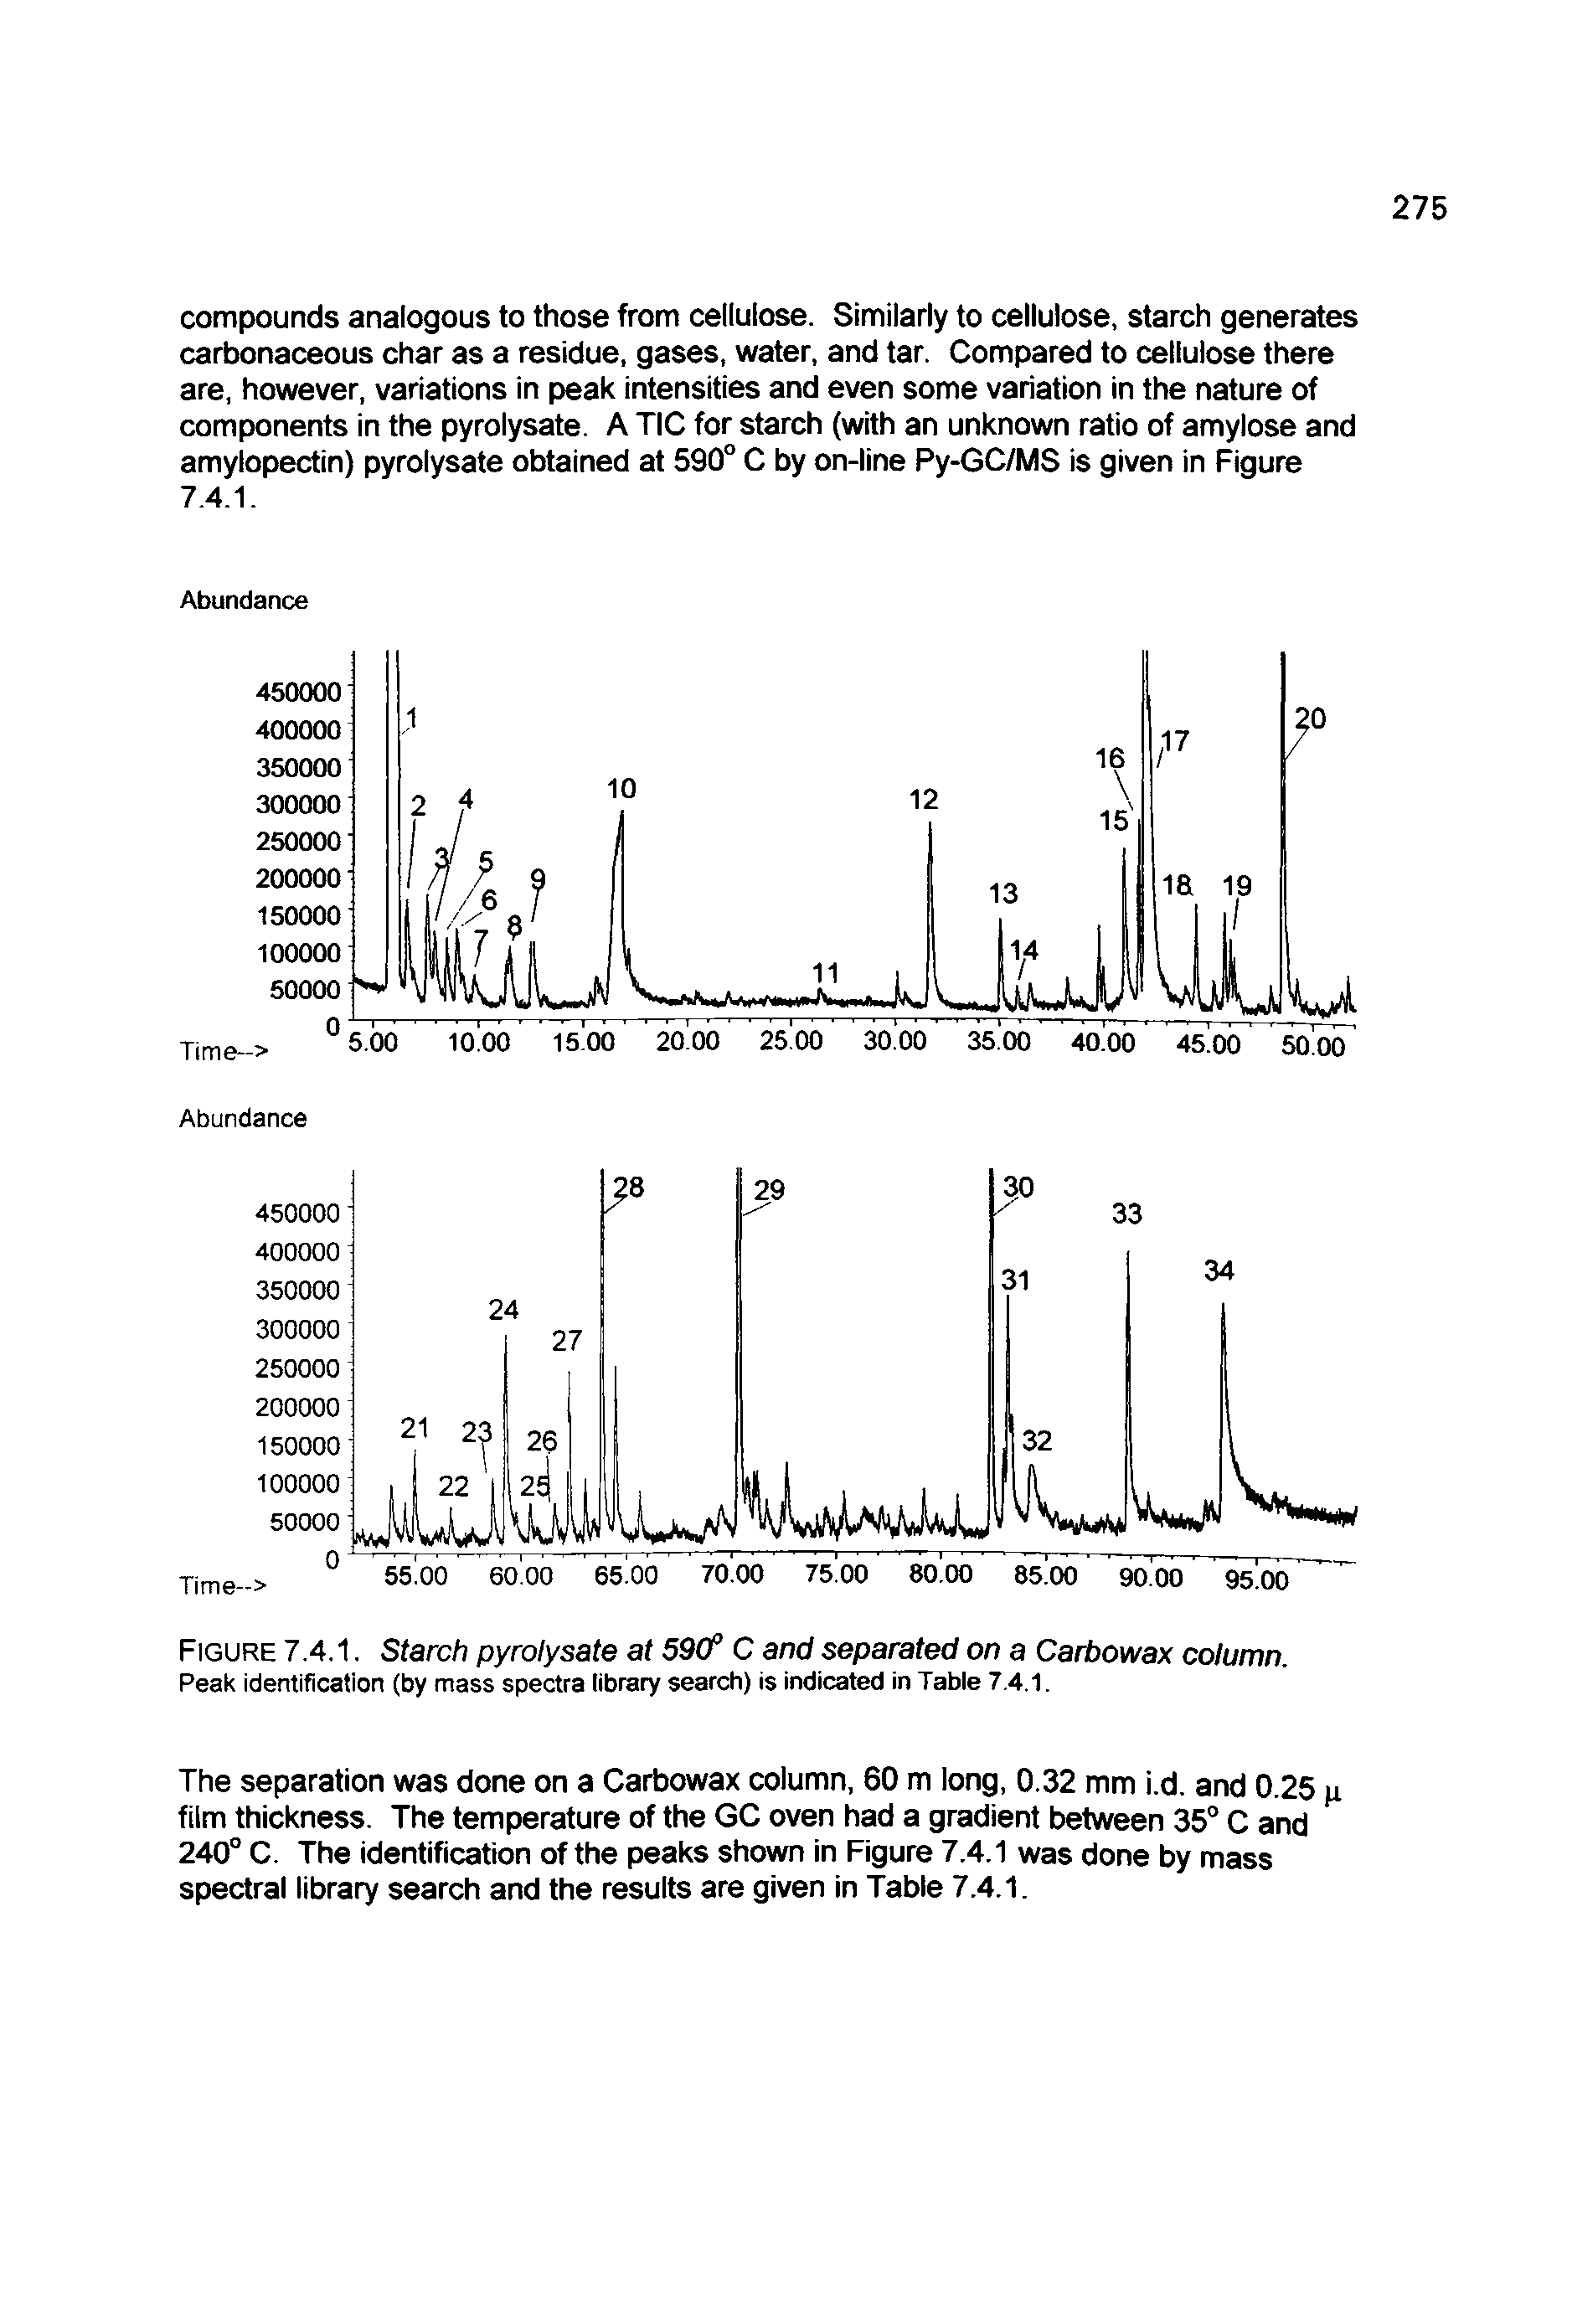 Figure 7.4.1. Starch pyrolysate at 59(f C and separated on a Carbowax column. Peak identification (by mass spectra library search) is indicated in Table 7,4.1.